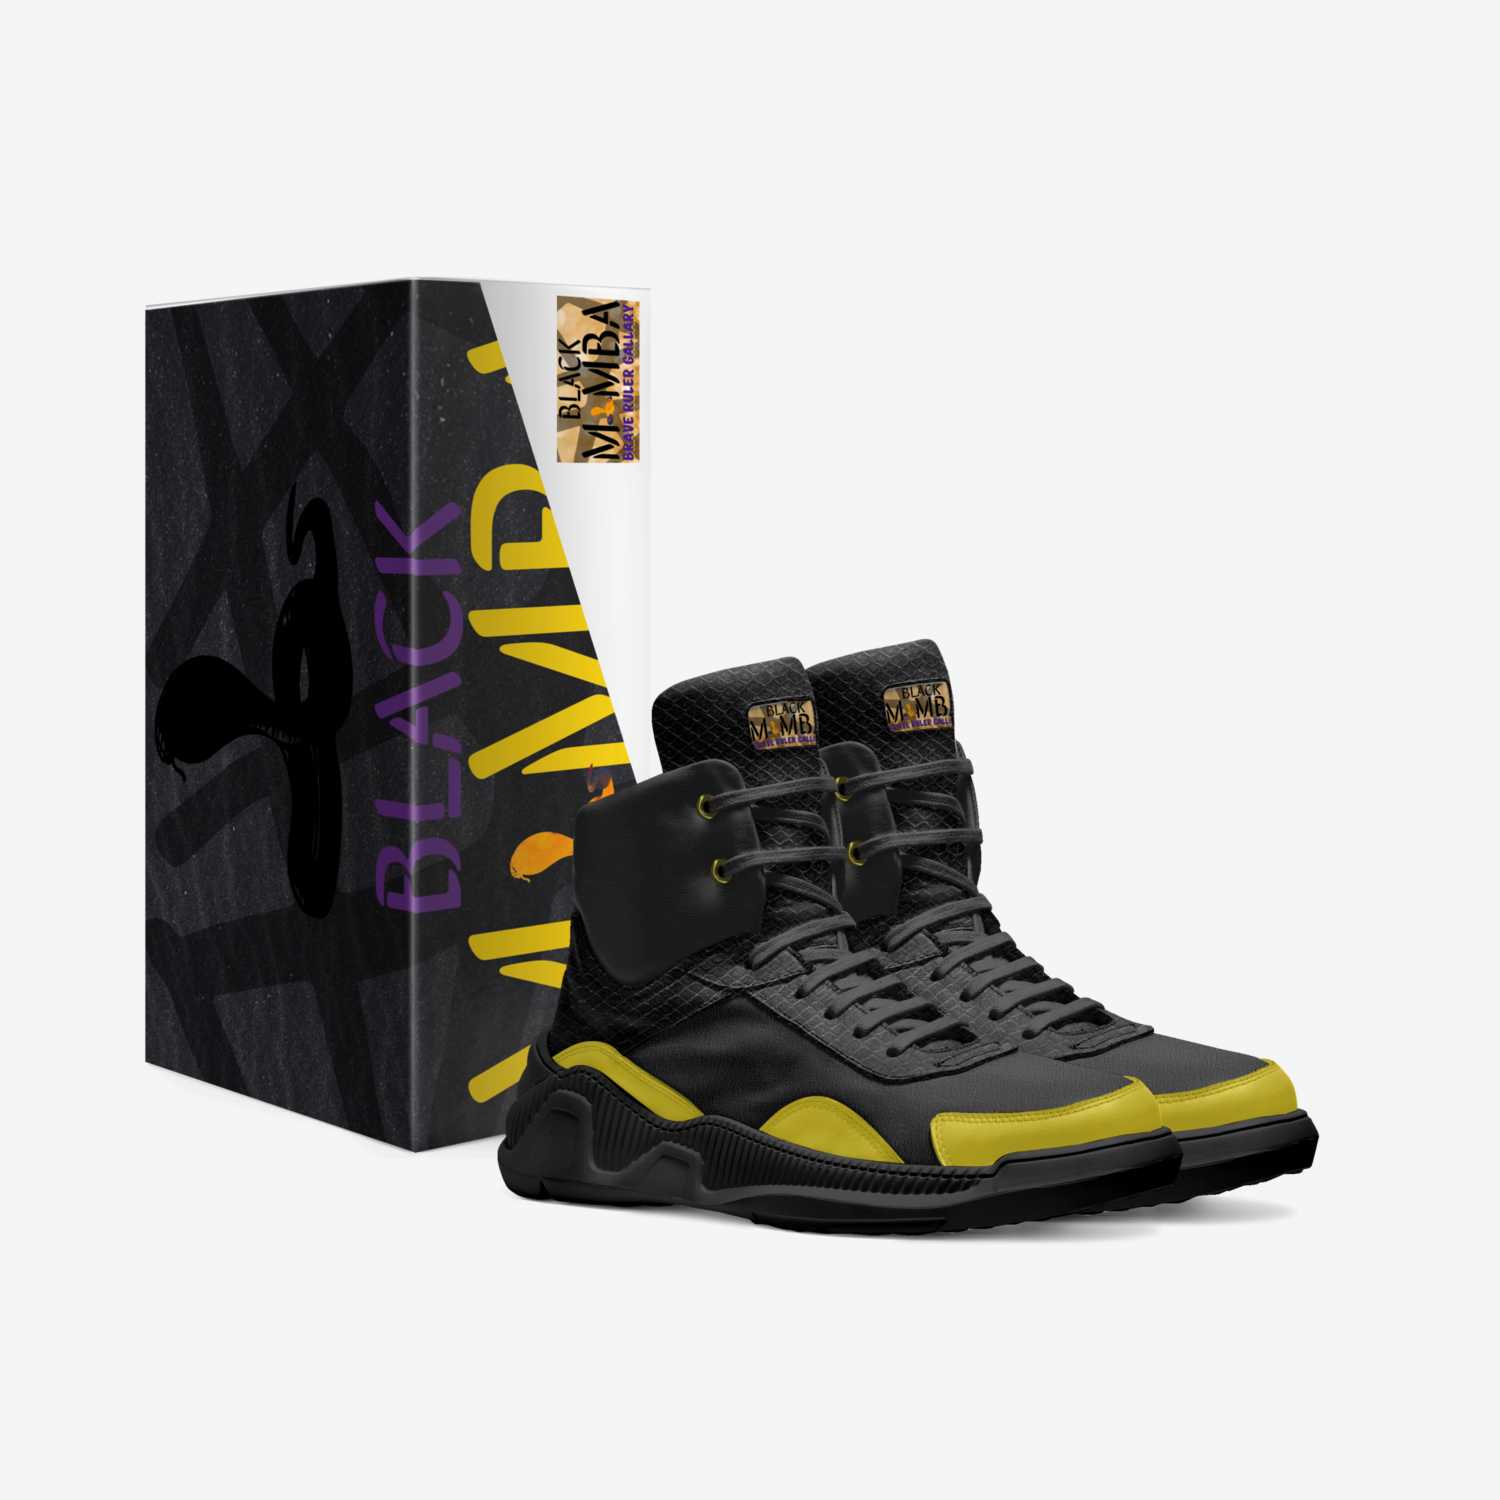 King Mamba custom made in Italy shoes by Frantz Augustin | Box view